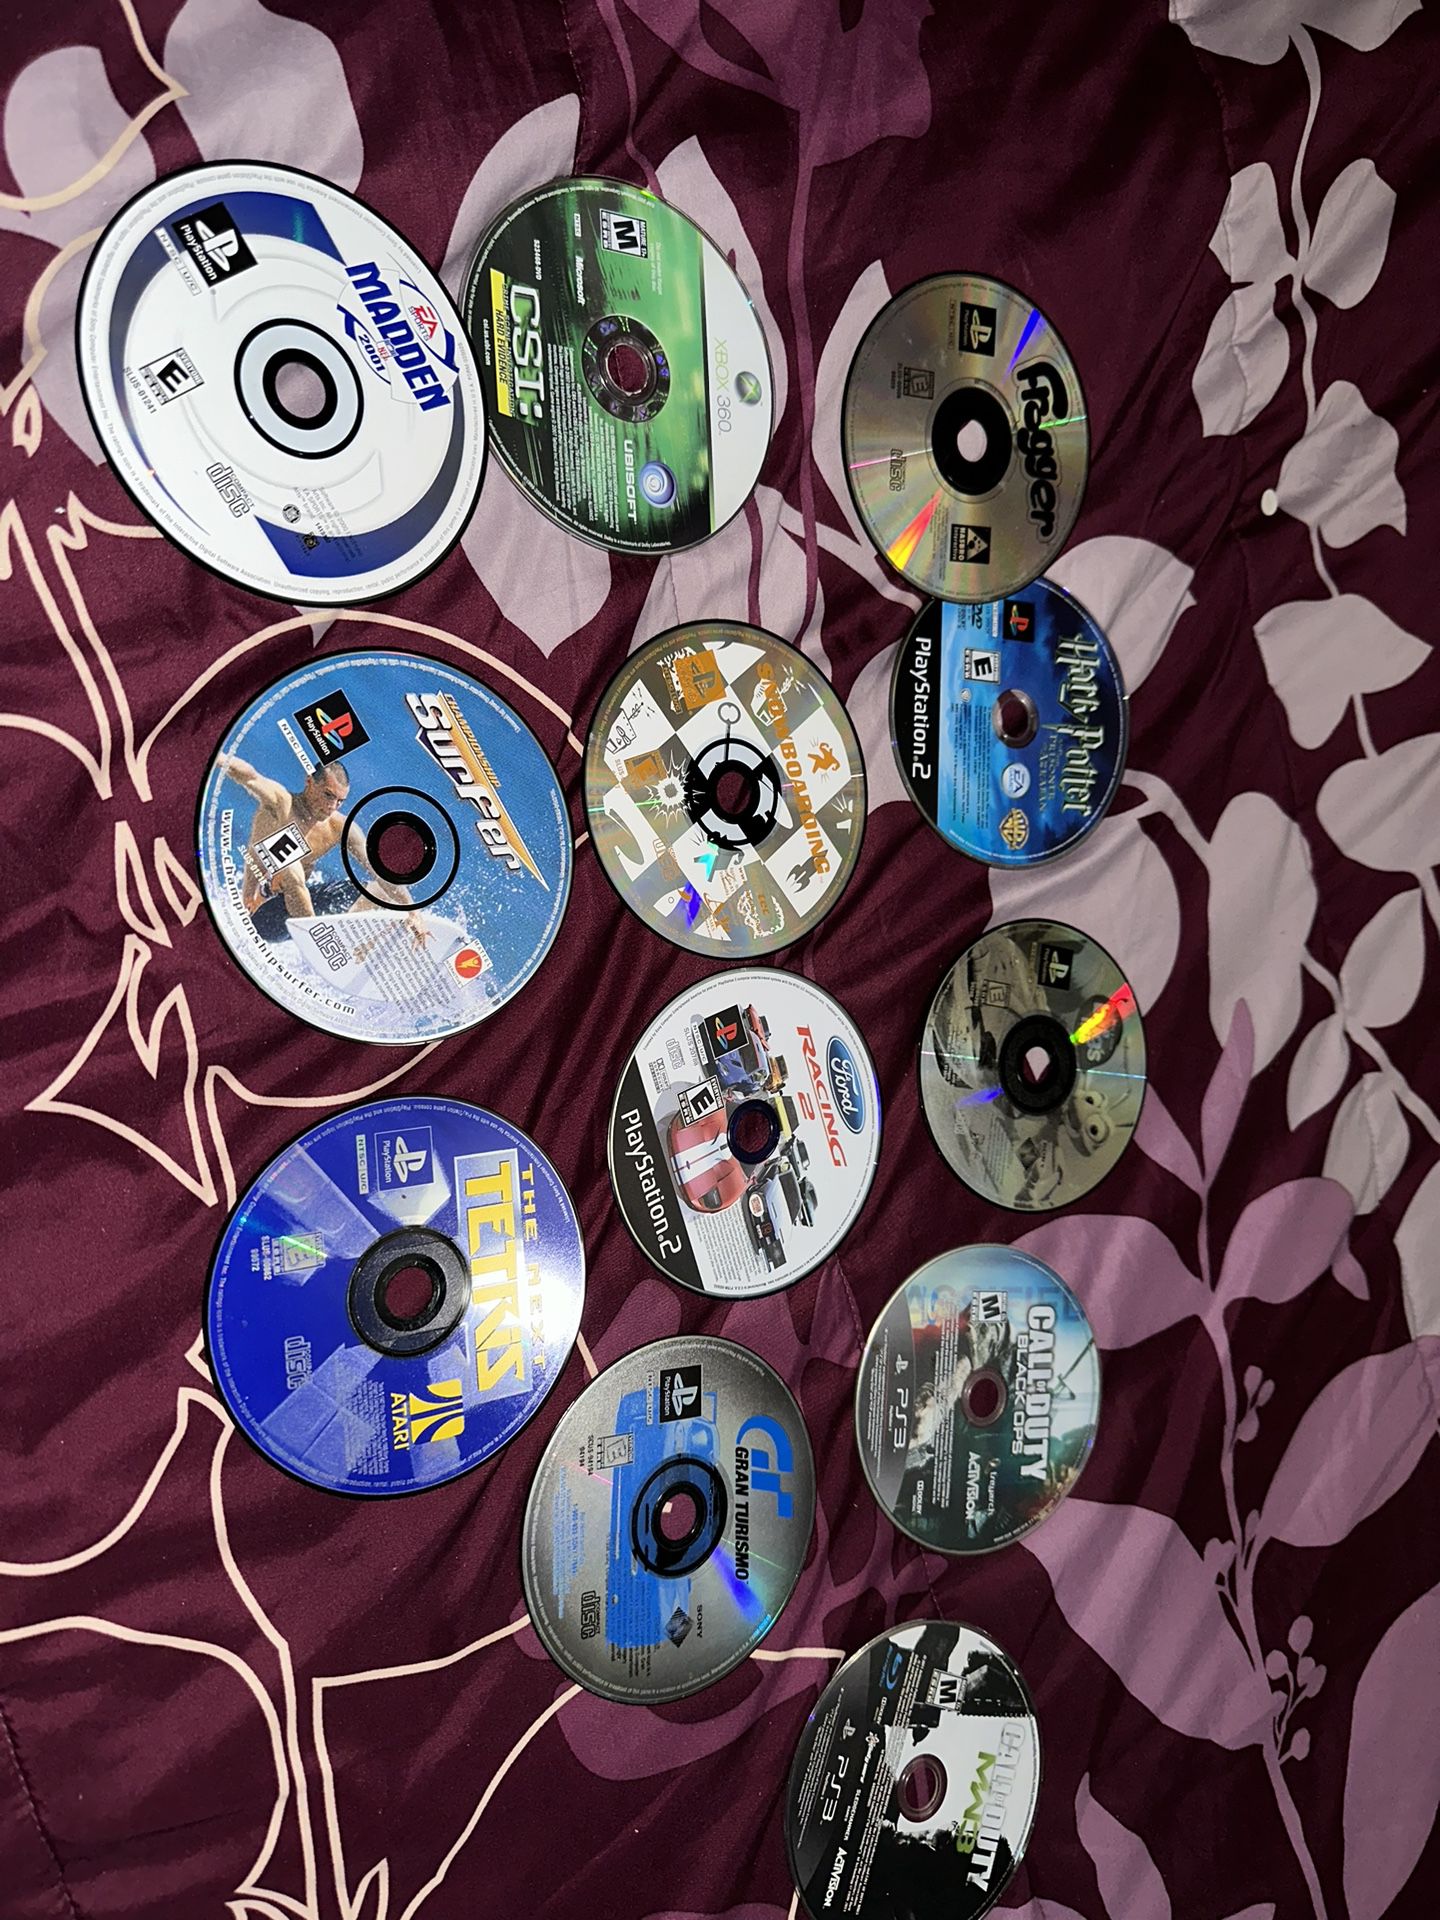 12 PLAYSTATION and XBOX GAMES